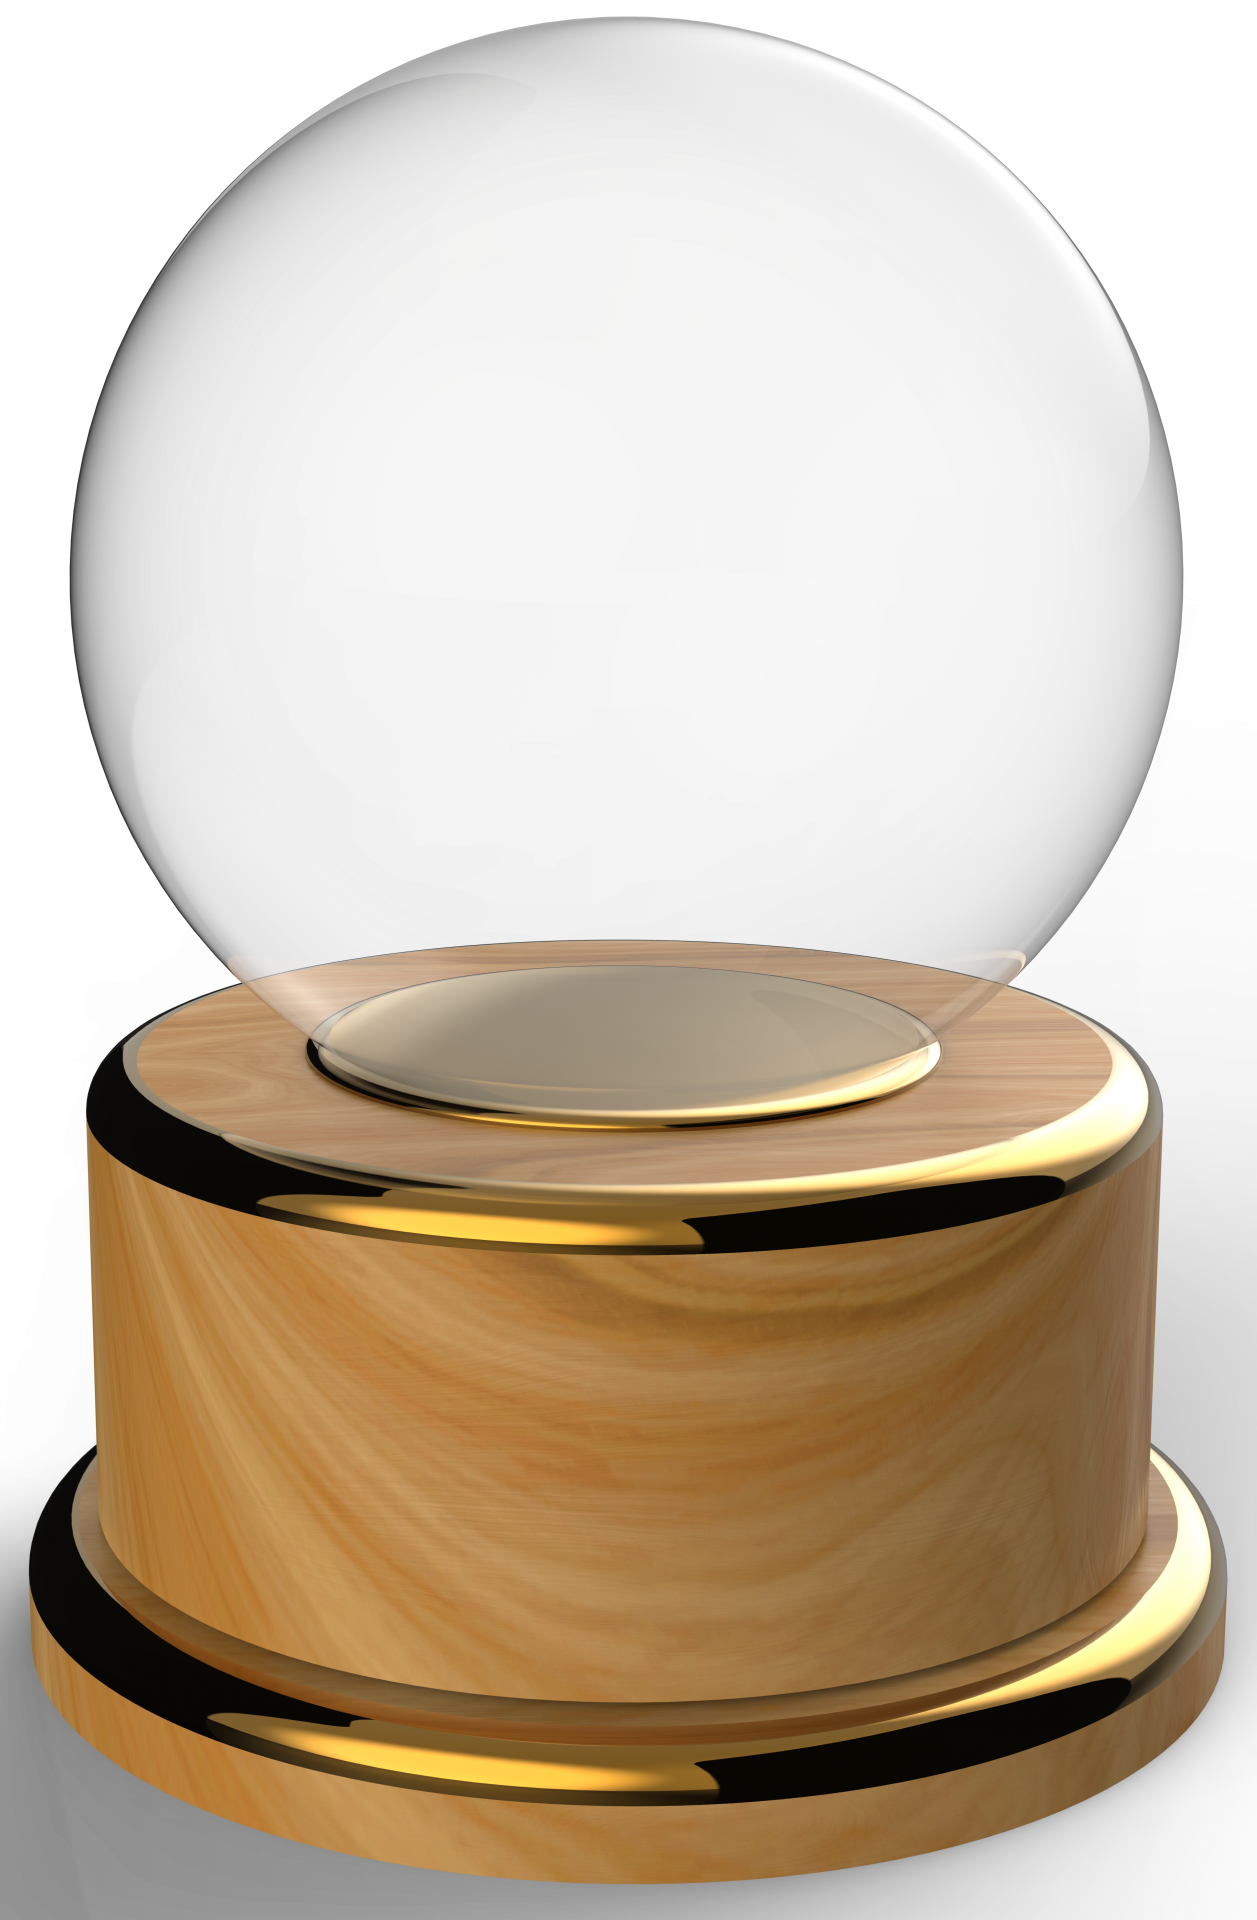 empty snowball in glass with wood